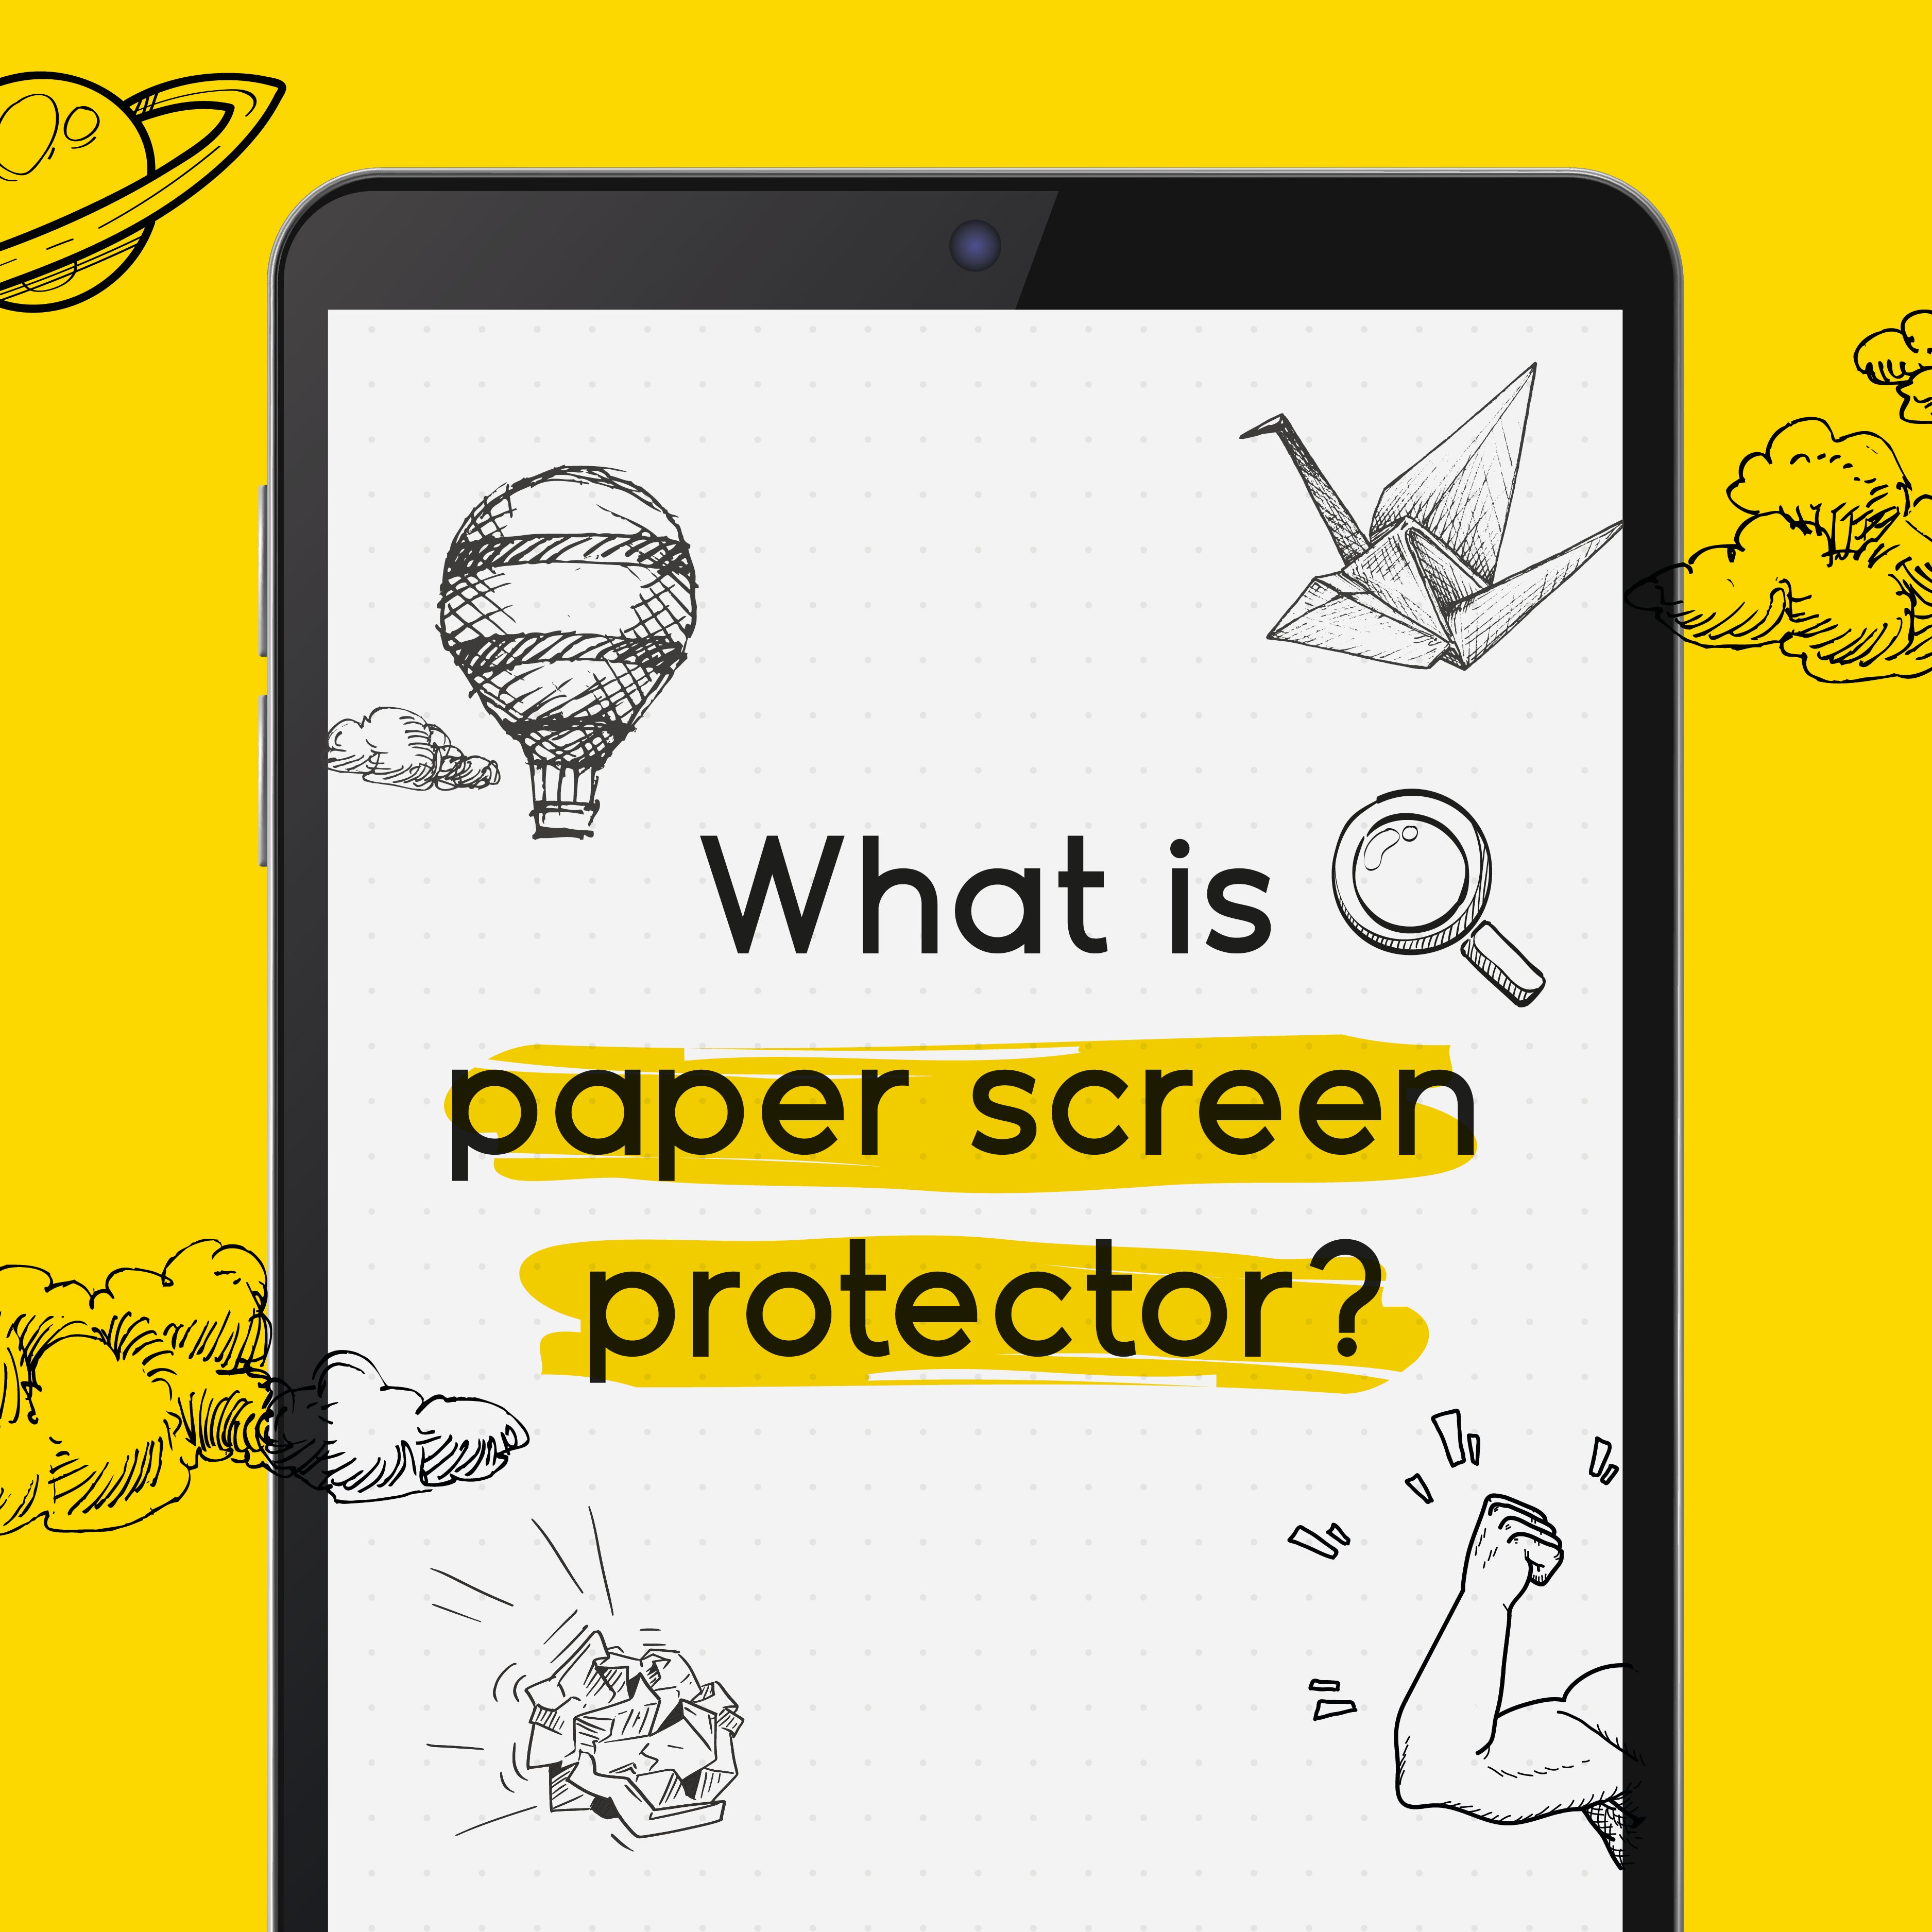 What is paper screen protector?